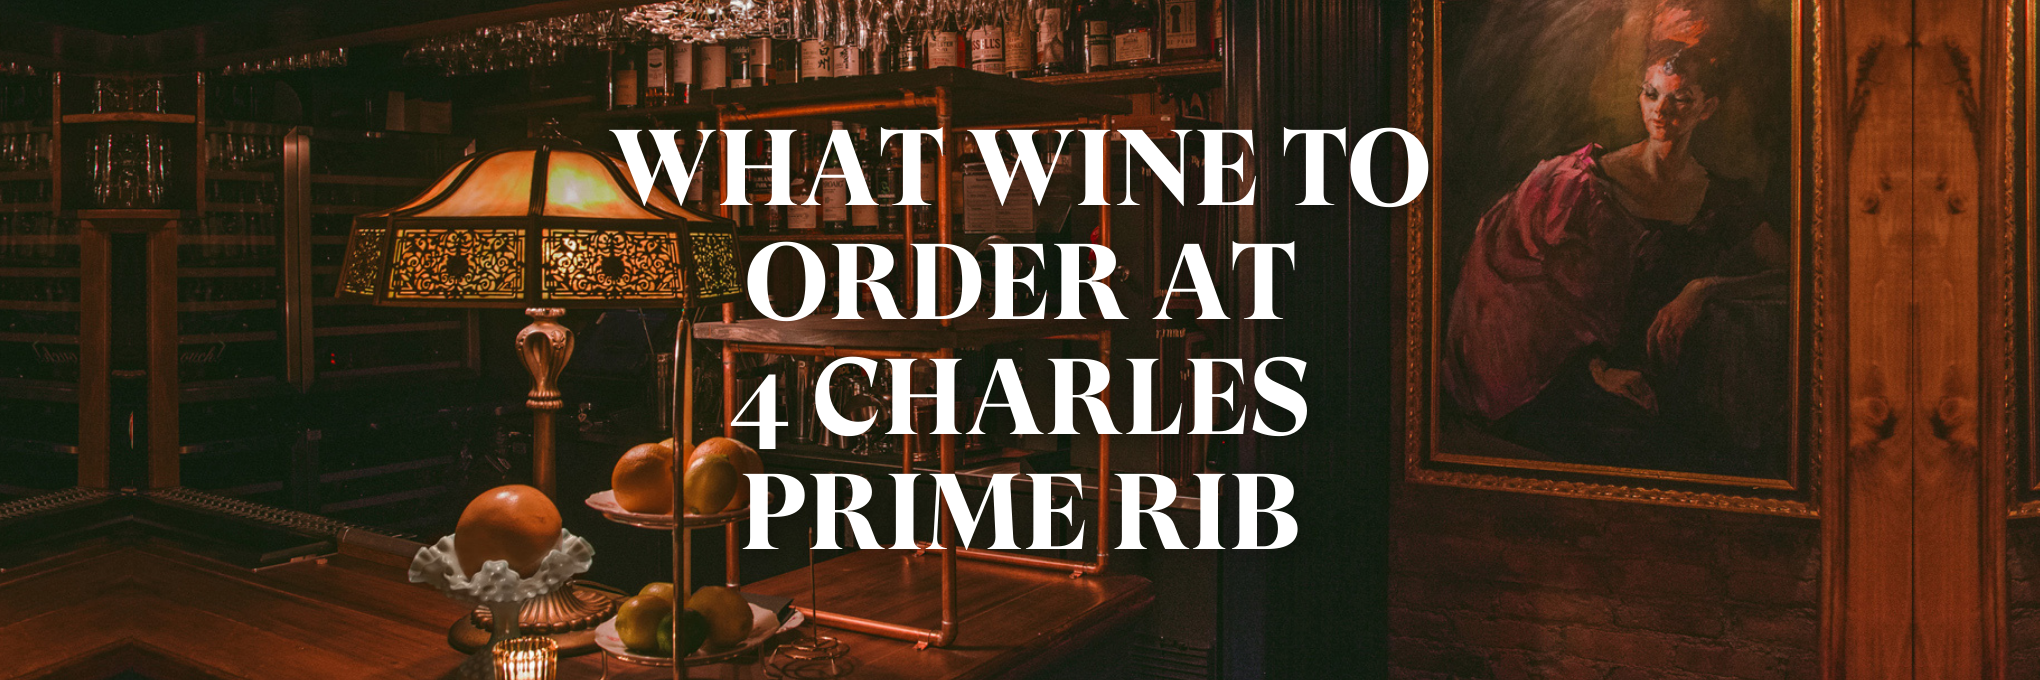 What Wine to Order at 4 Charles